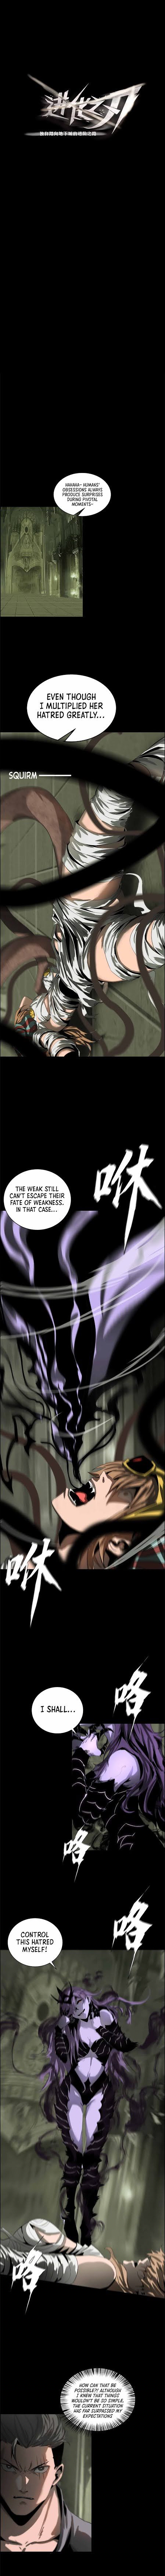 The Blade Of Evolution-Walking Alone In The Dungeon Chapter 43 page 2